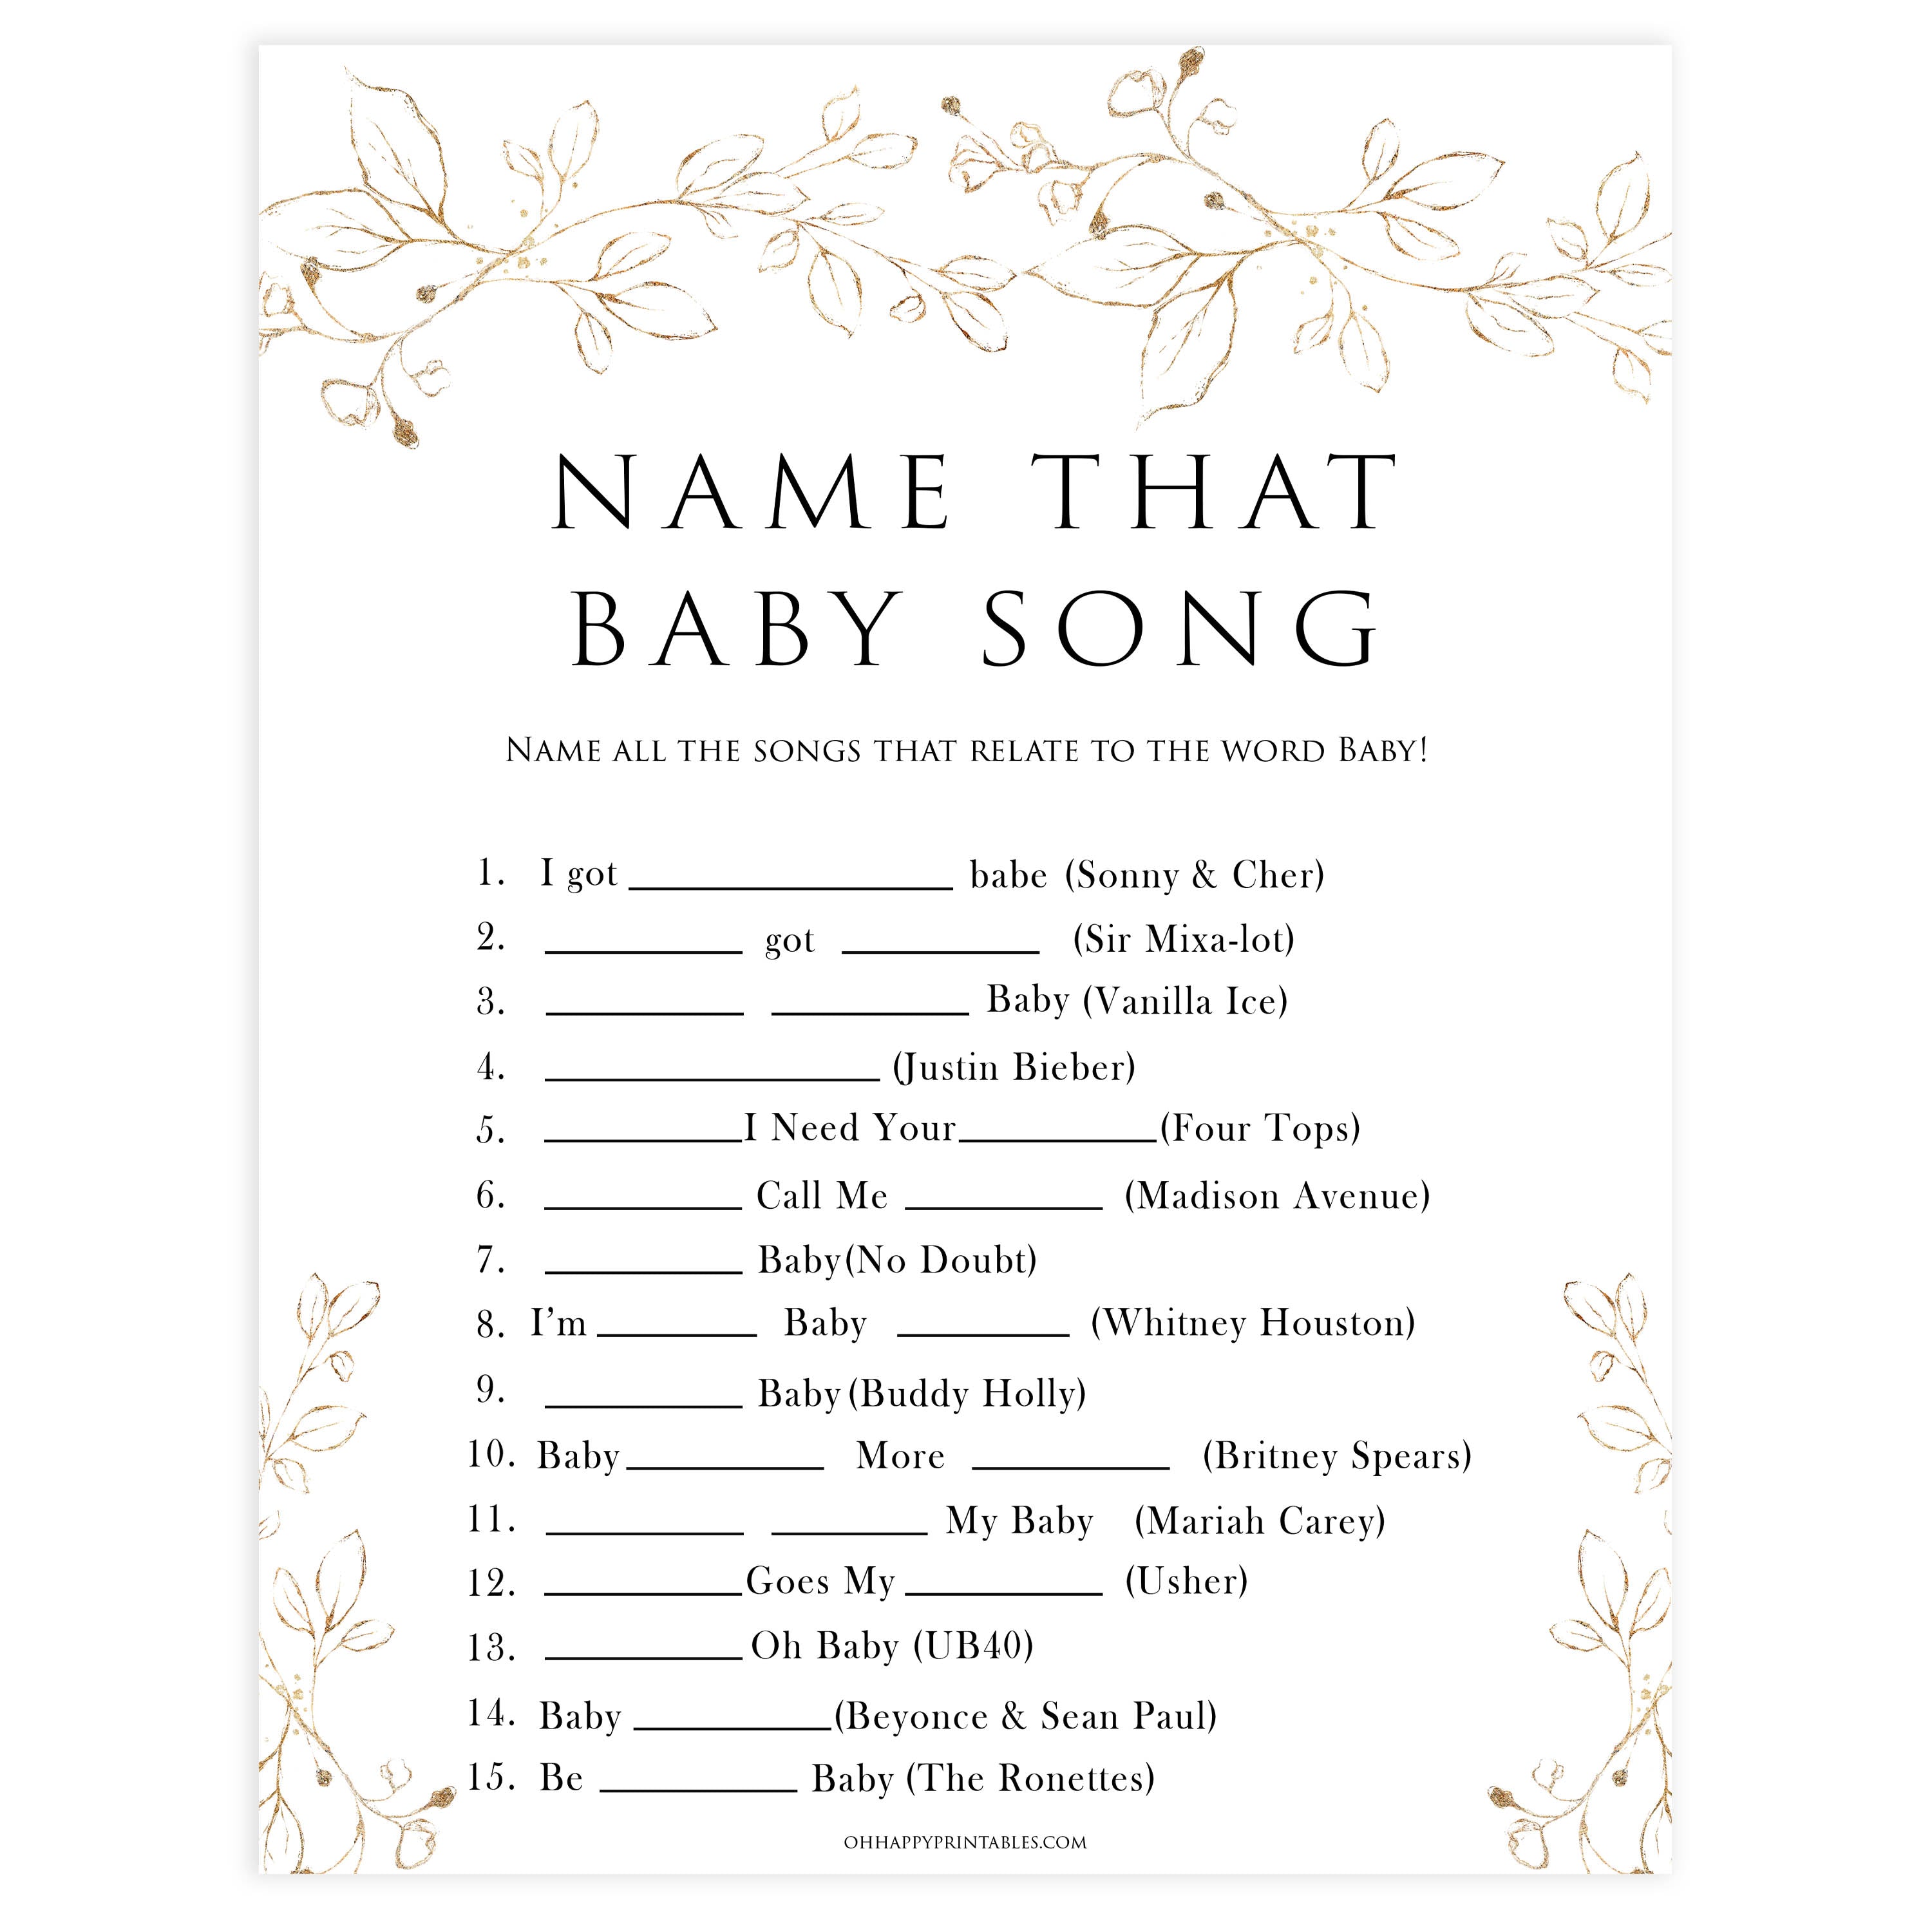 name that baby song game, Printable baby shower games, gold leaf baby games, baby shower games, fun baby shower ideas, top baby shower ideas, gold leaf baby shower, baby shower games, fun gold leaf baby shower ideas